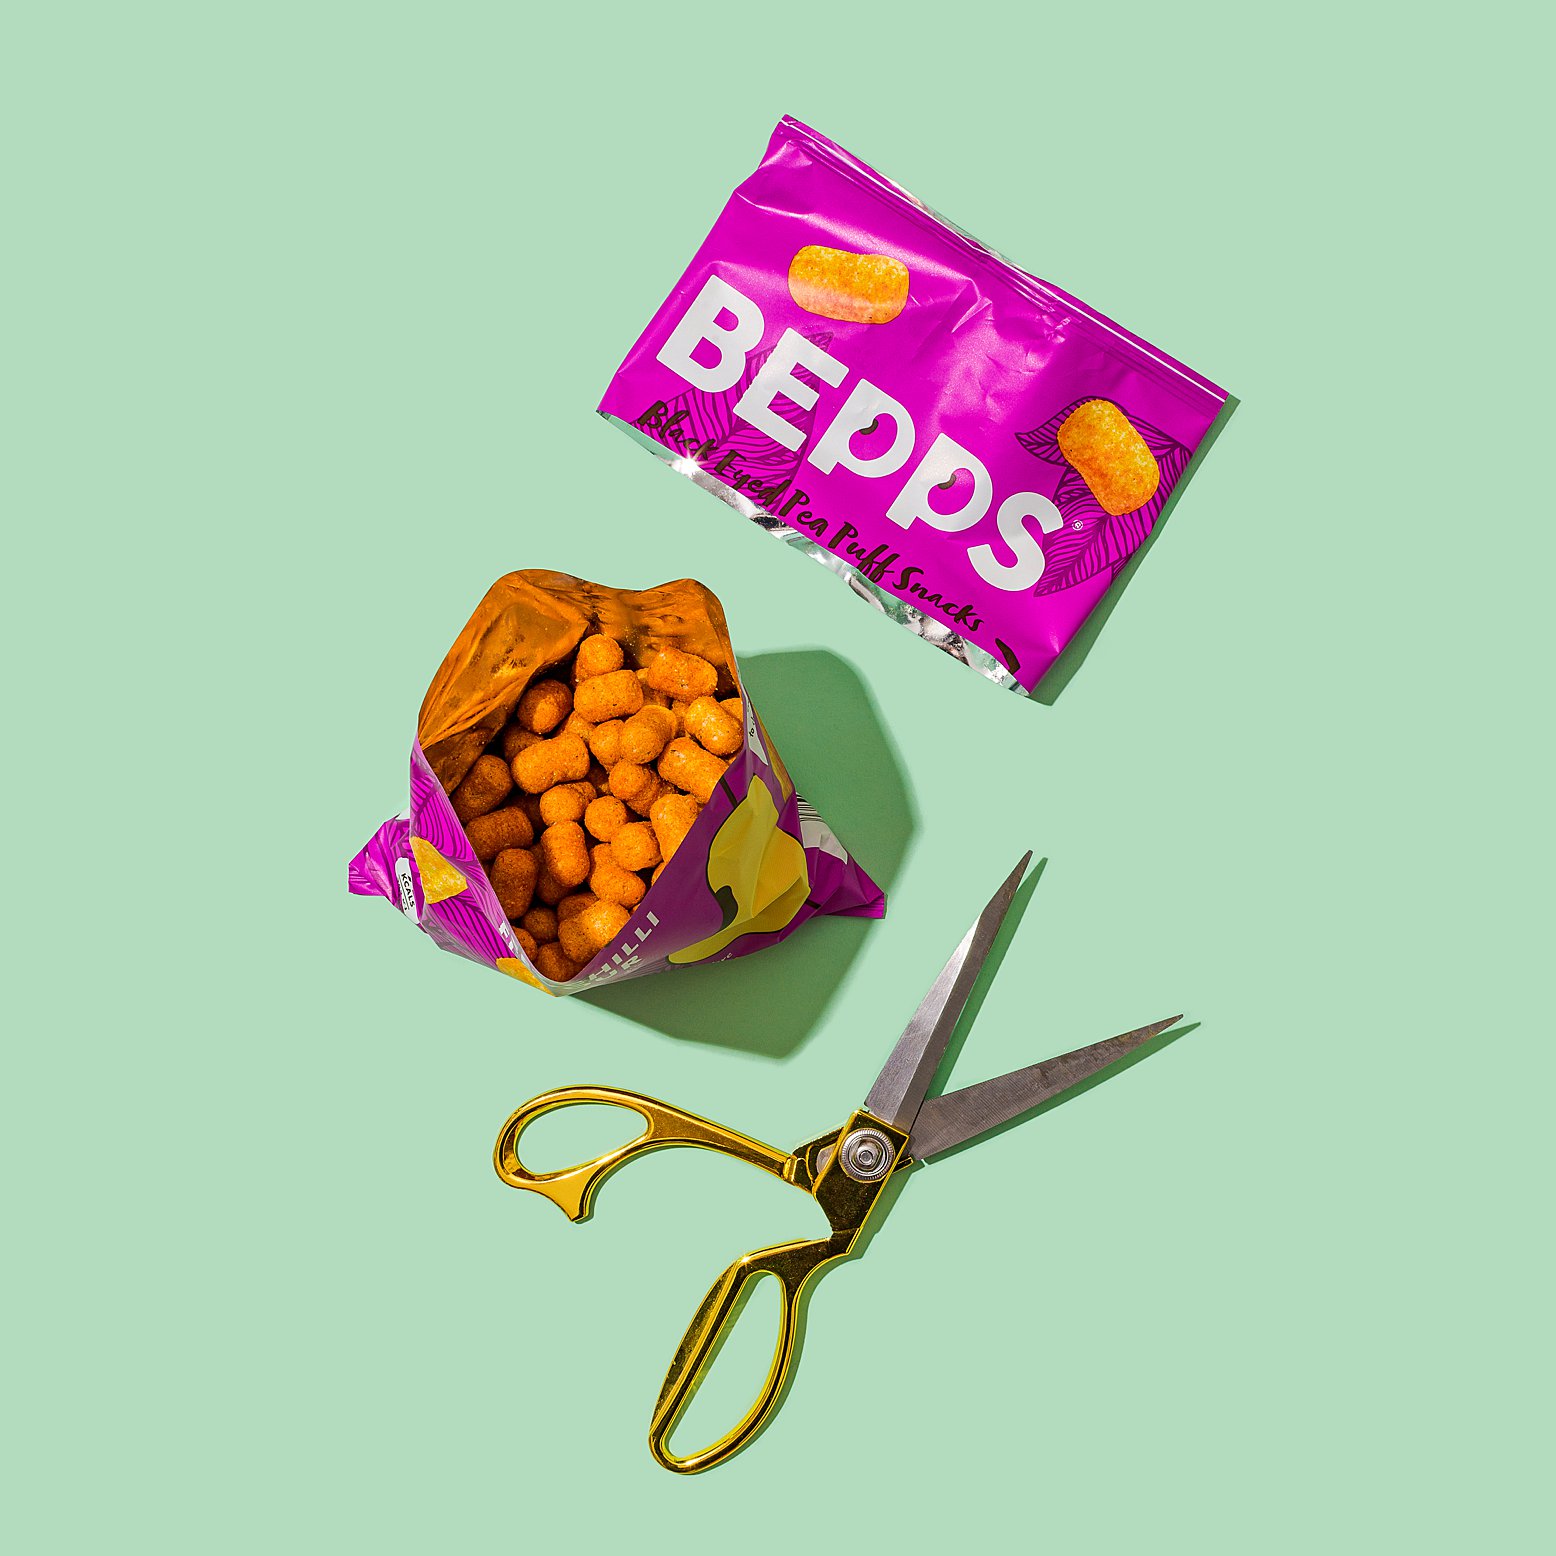 Product photography & content creation for Bepps Snacks. Product photography & styling by Marianne Taylor.